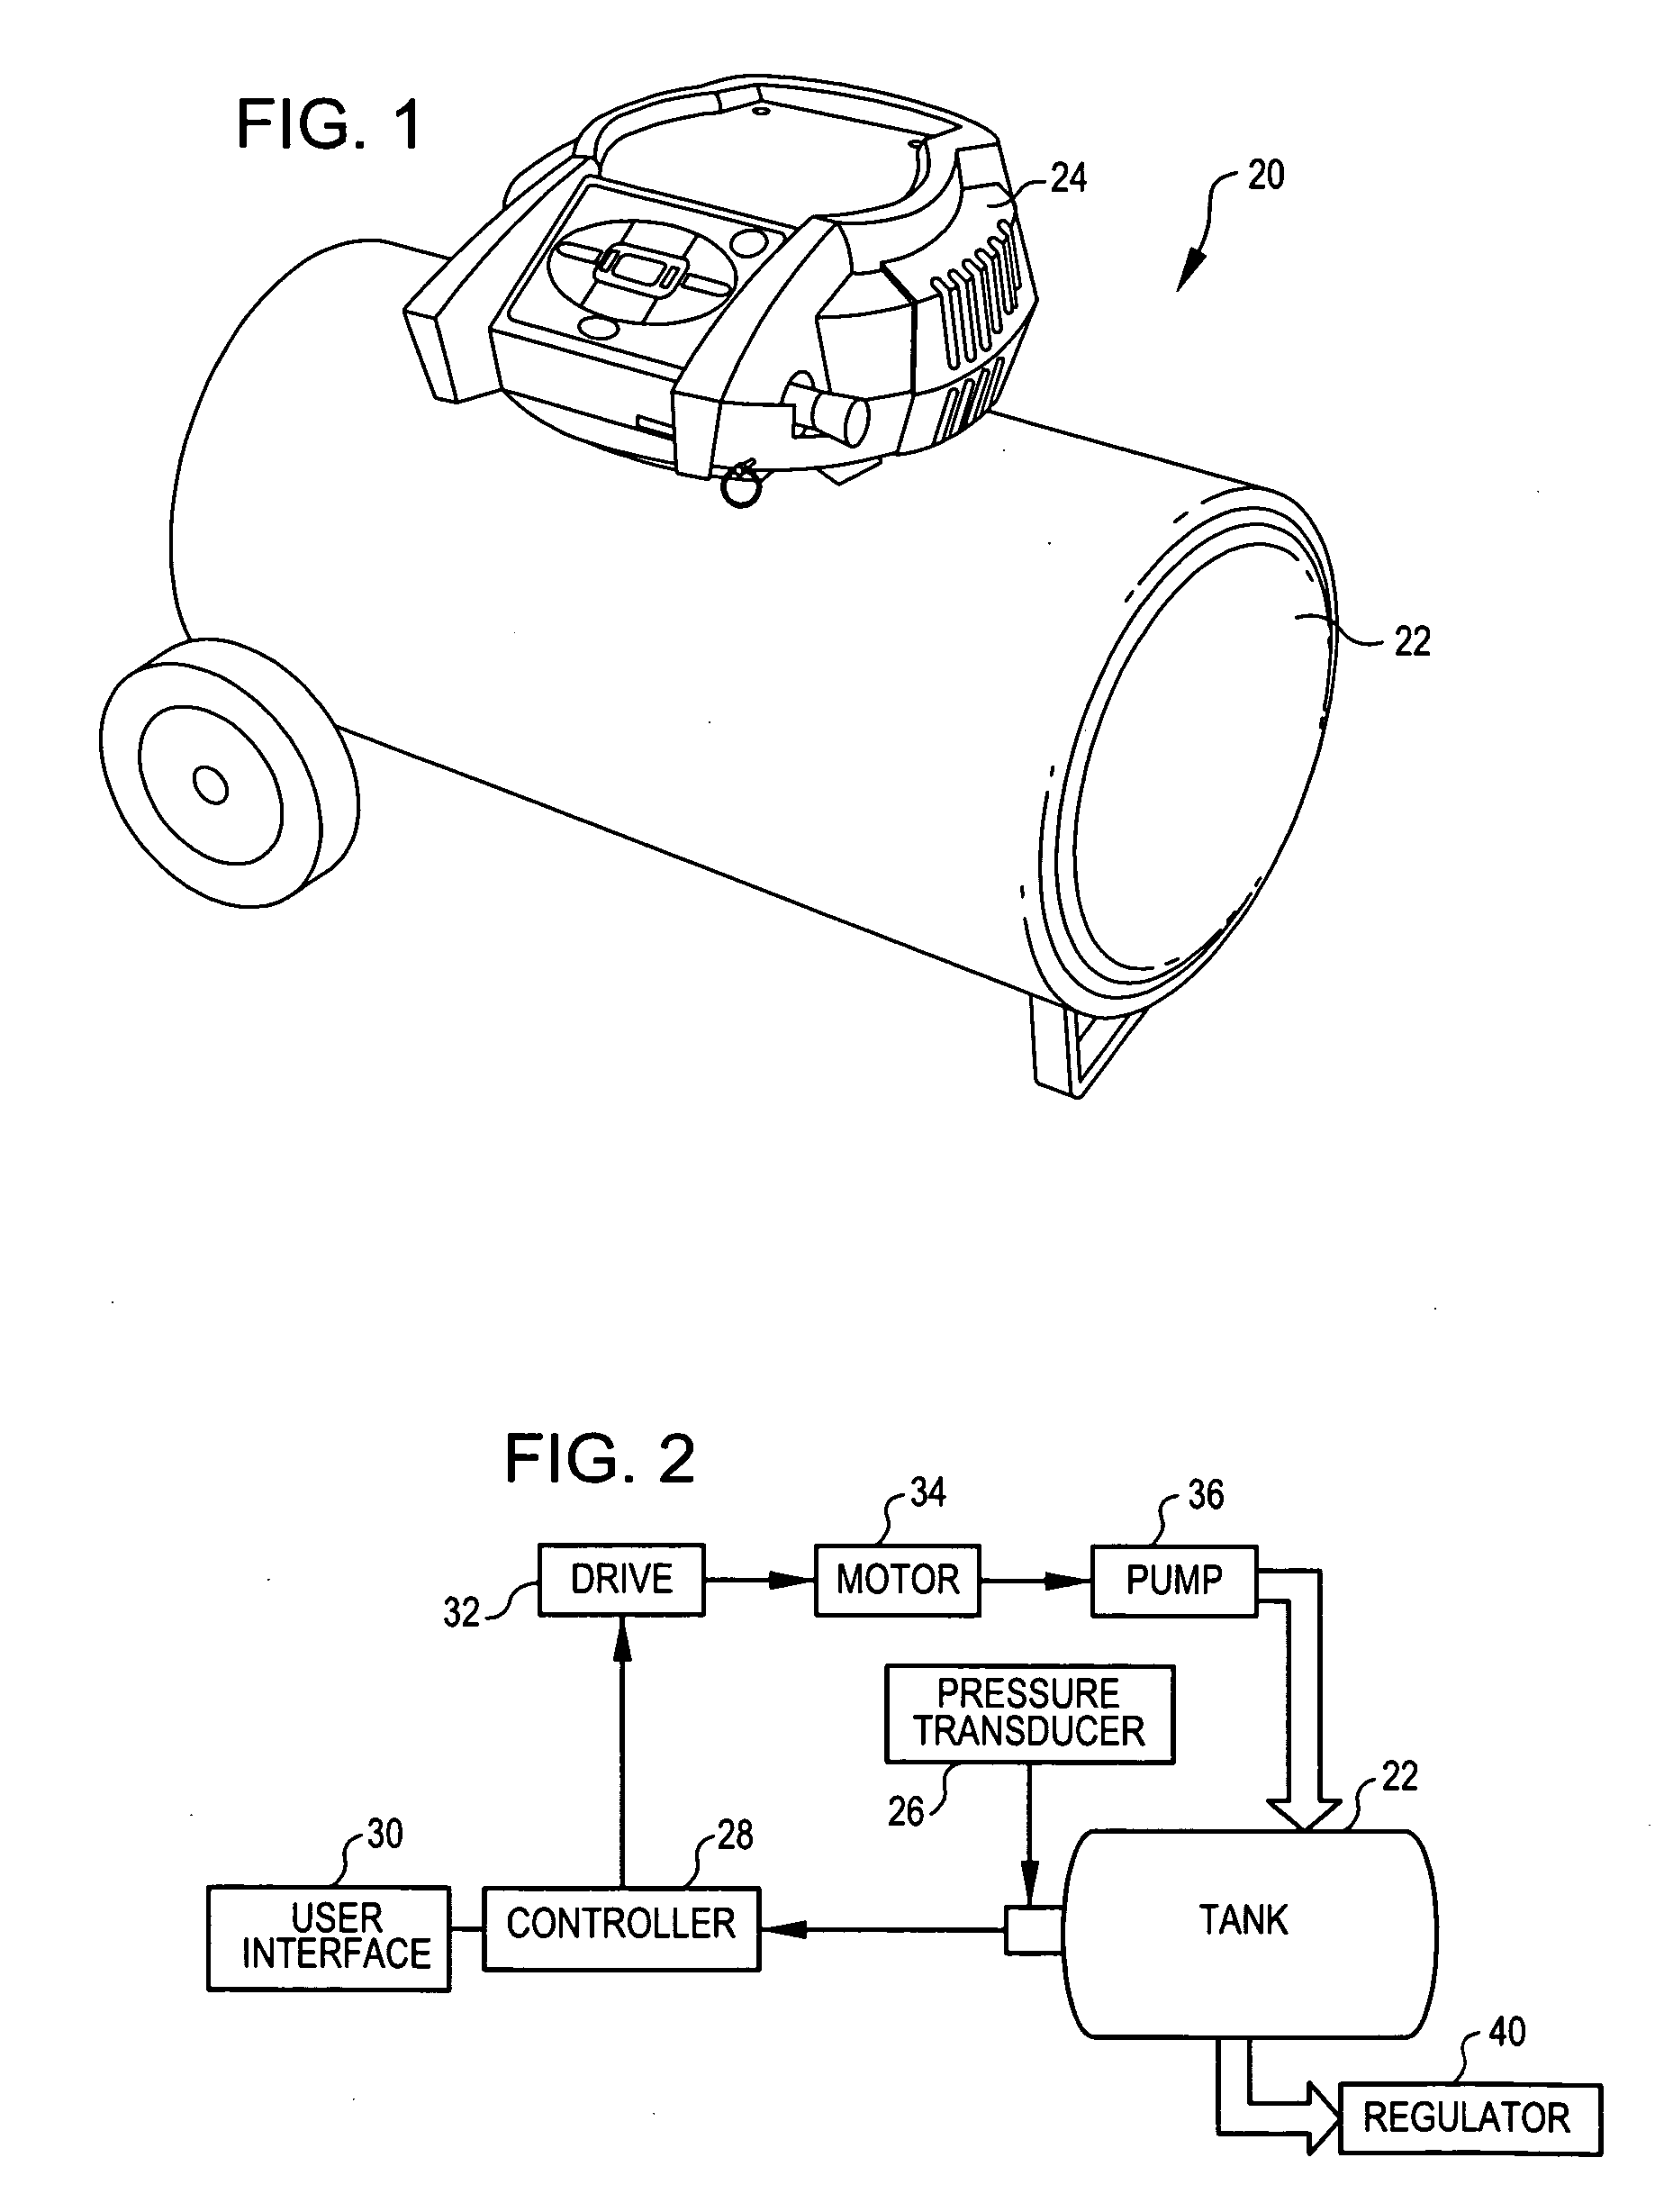 Air compressor tools that communicate with an air compressor